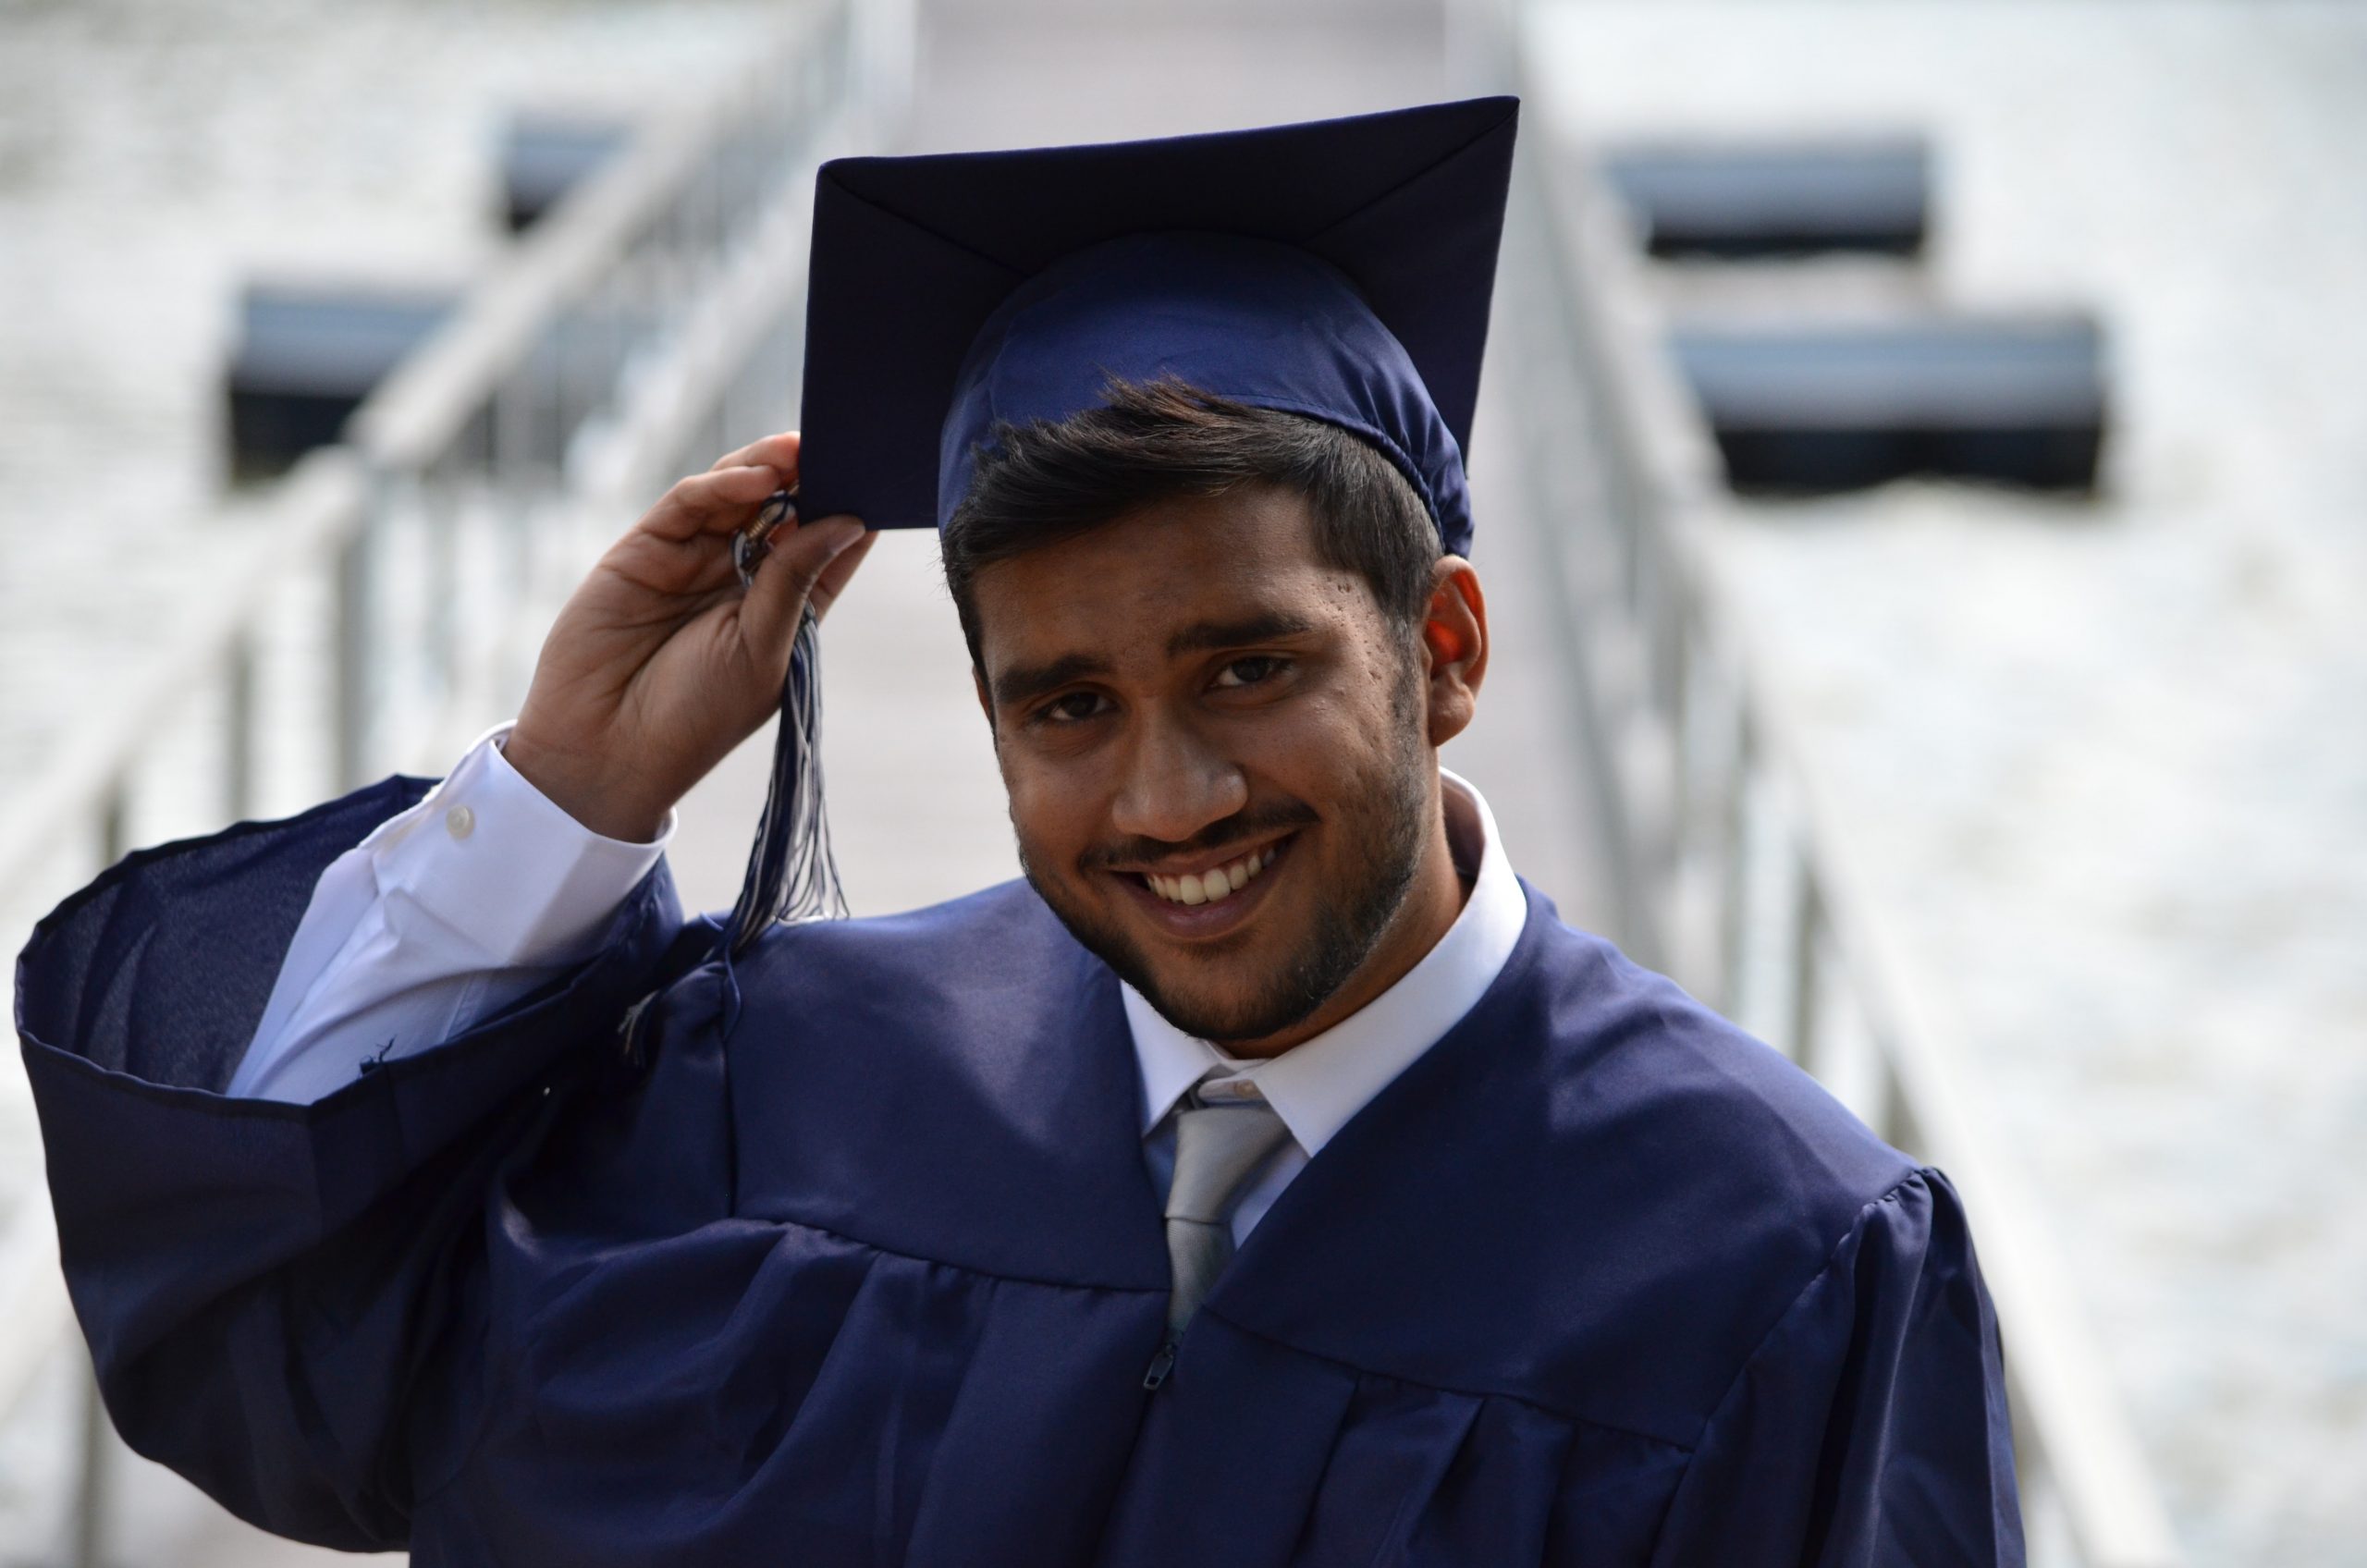 A young south Asian man wears a cap and gown and smiles at the camera.